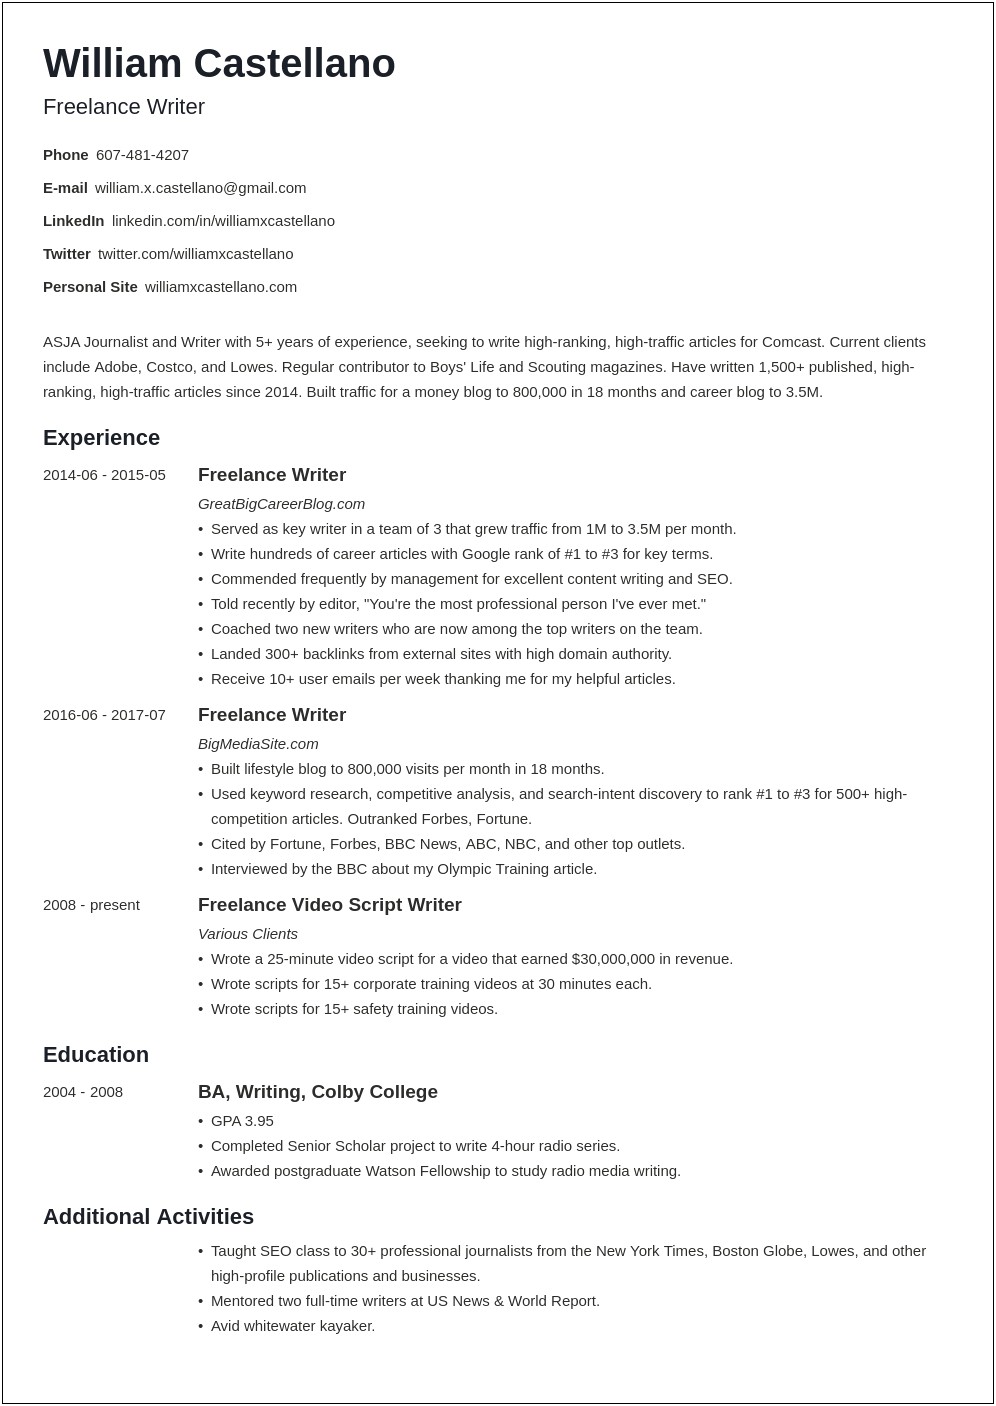 Can I Include My Work Projects Into Resume